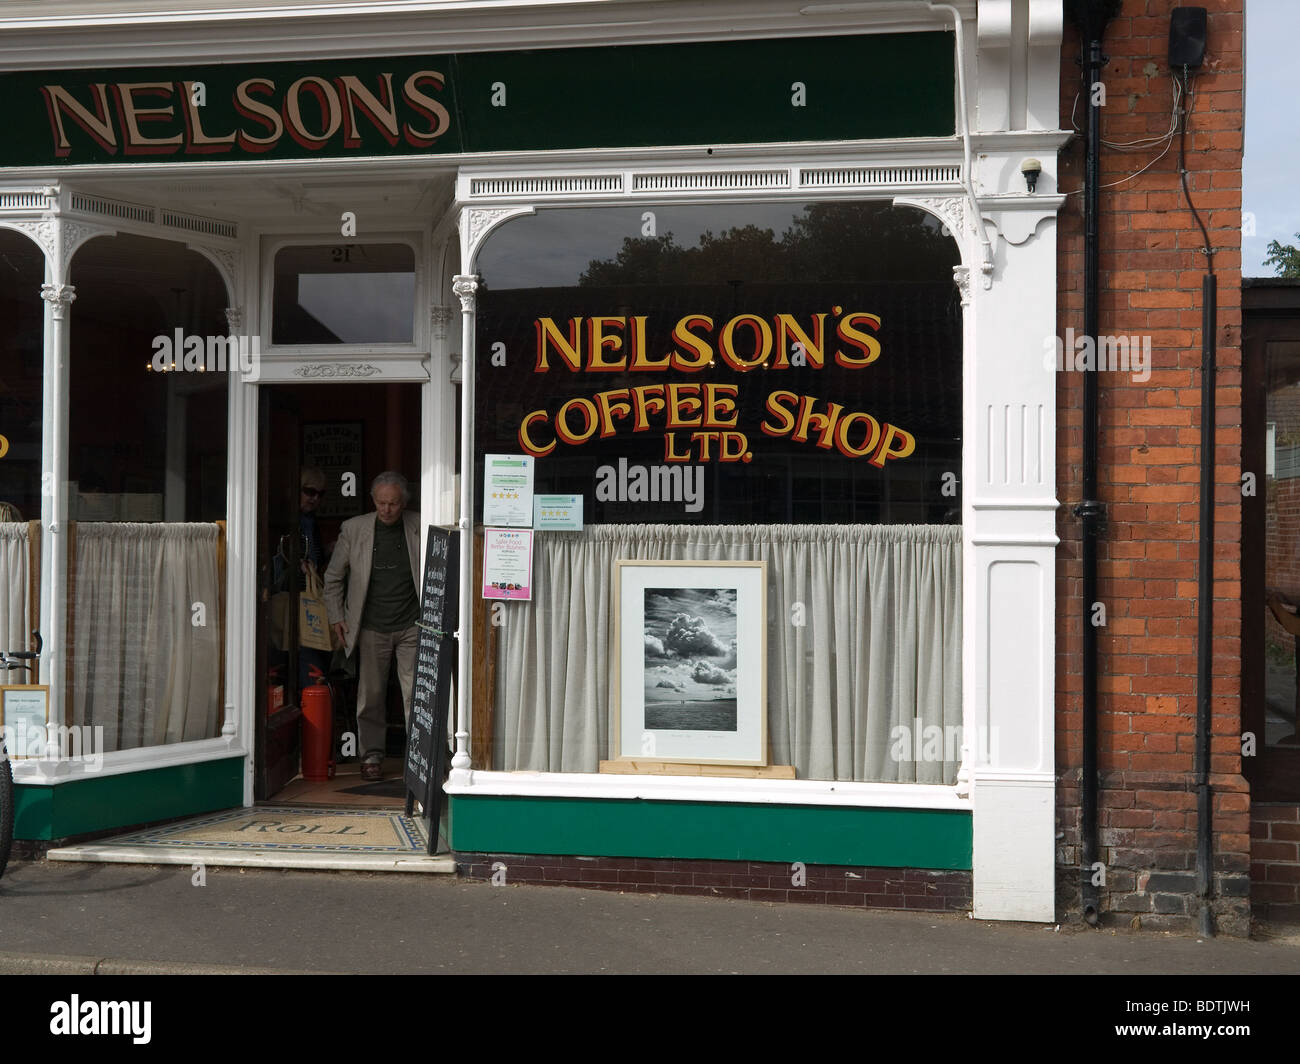 Nelson's Coffee Shop Ltd named after local hero Admiral Horatio Nelson in Staithe Street Wells next the Sea Norfolk Stock Photo